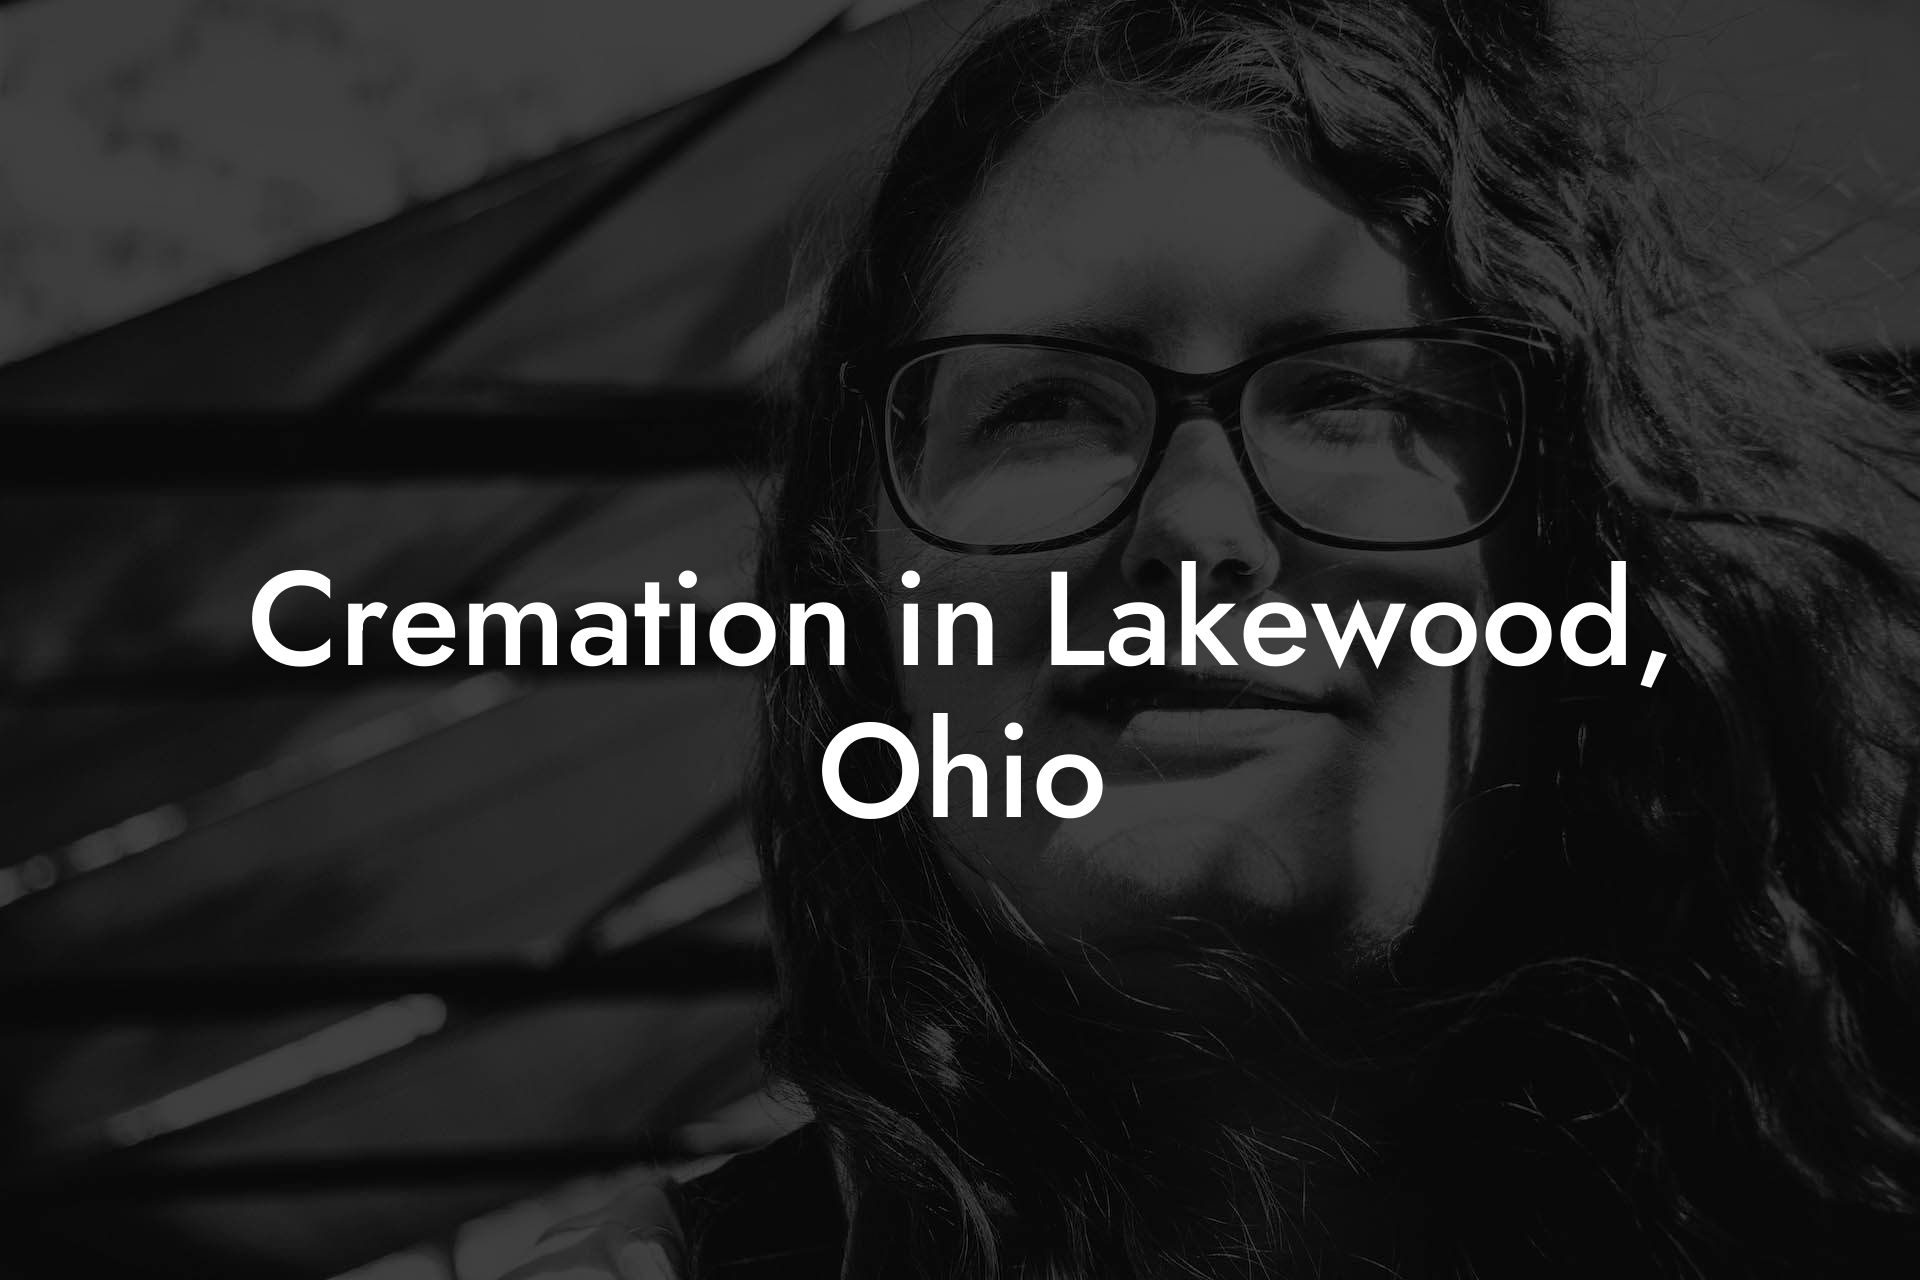 Cremation in Lakewood, Ohio